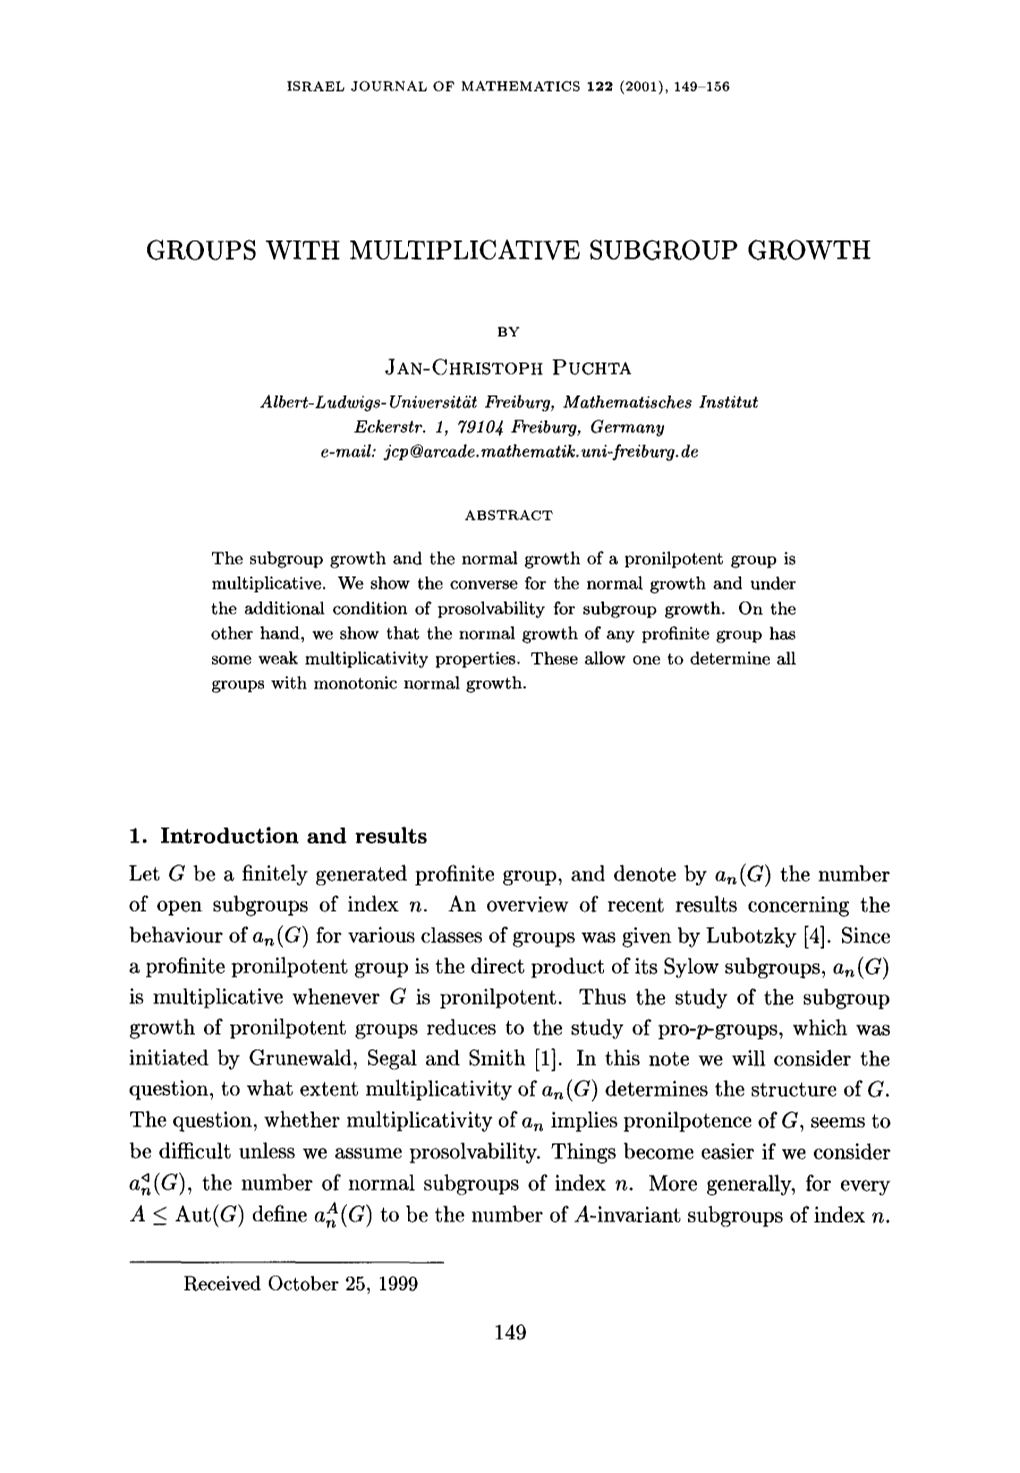 Groups with Multiplicative Subgroup Growth